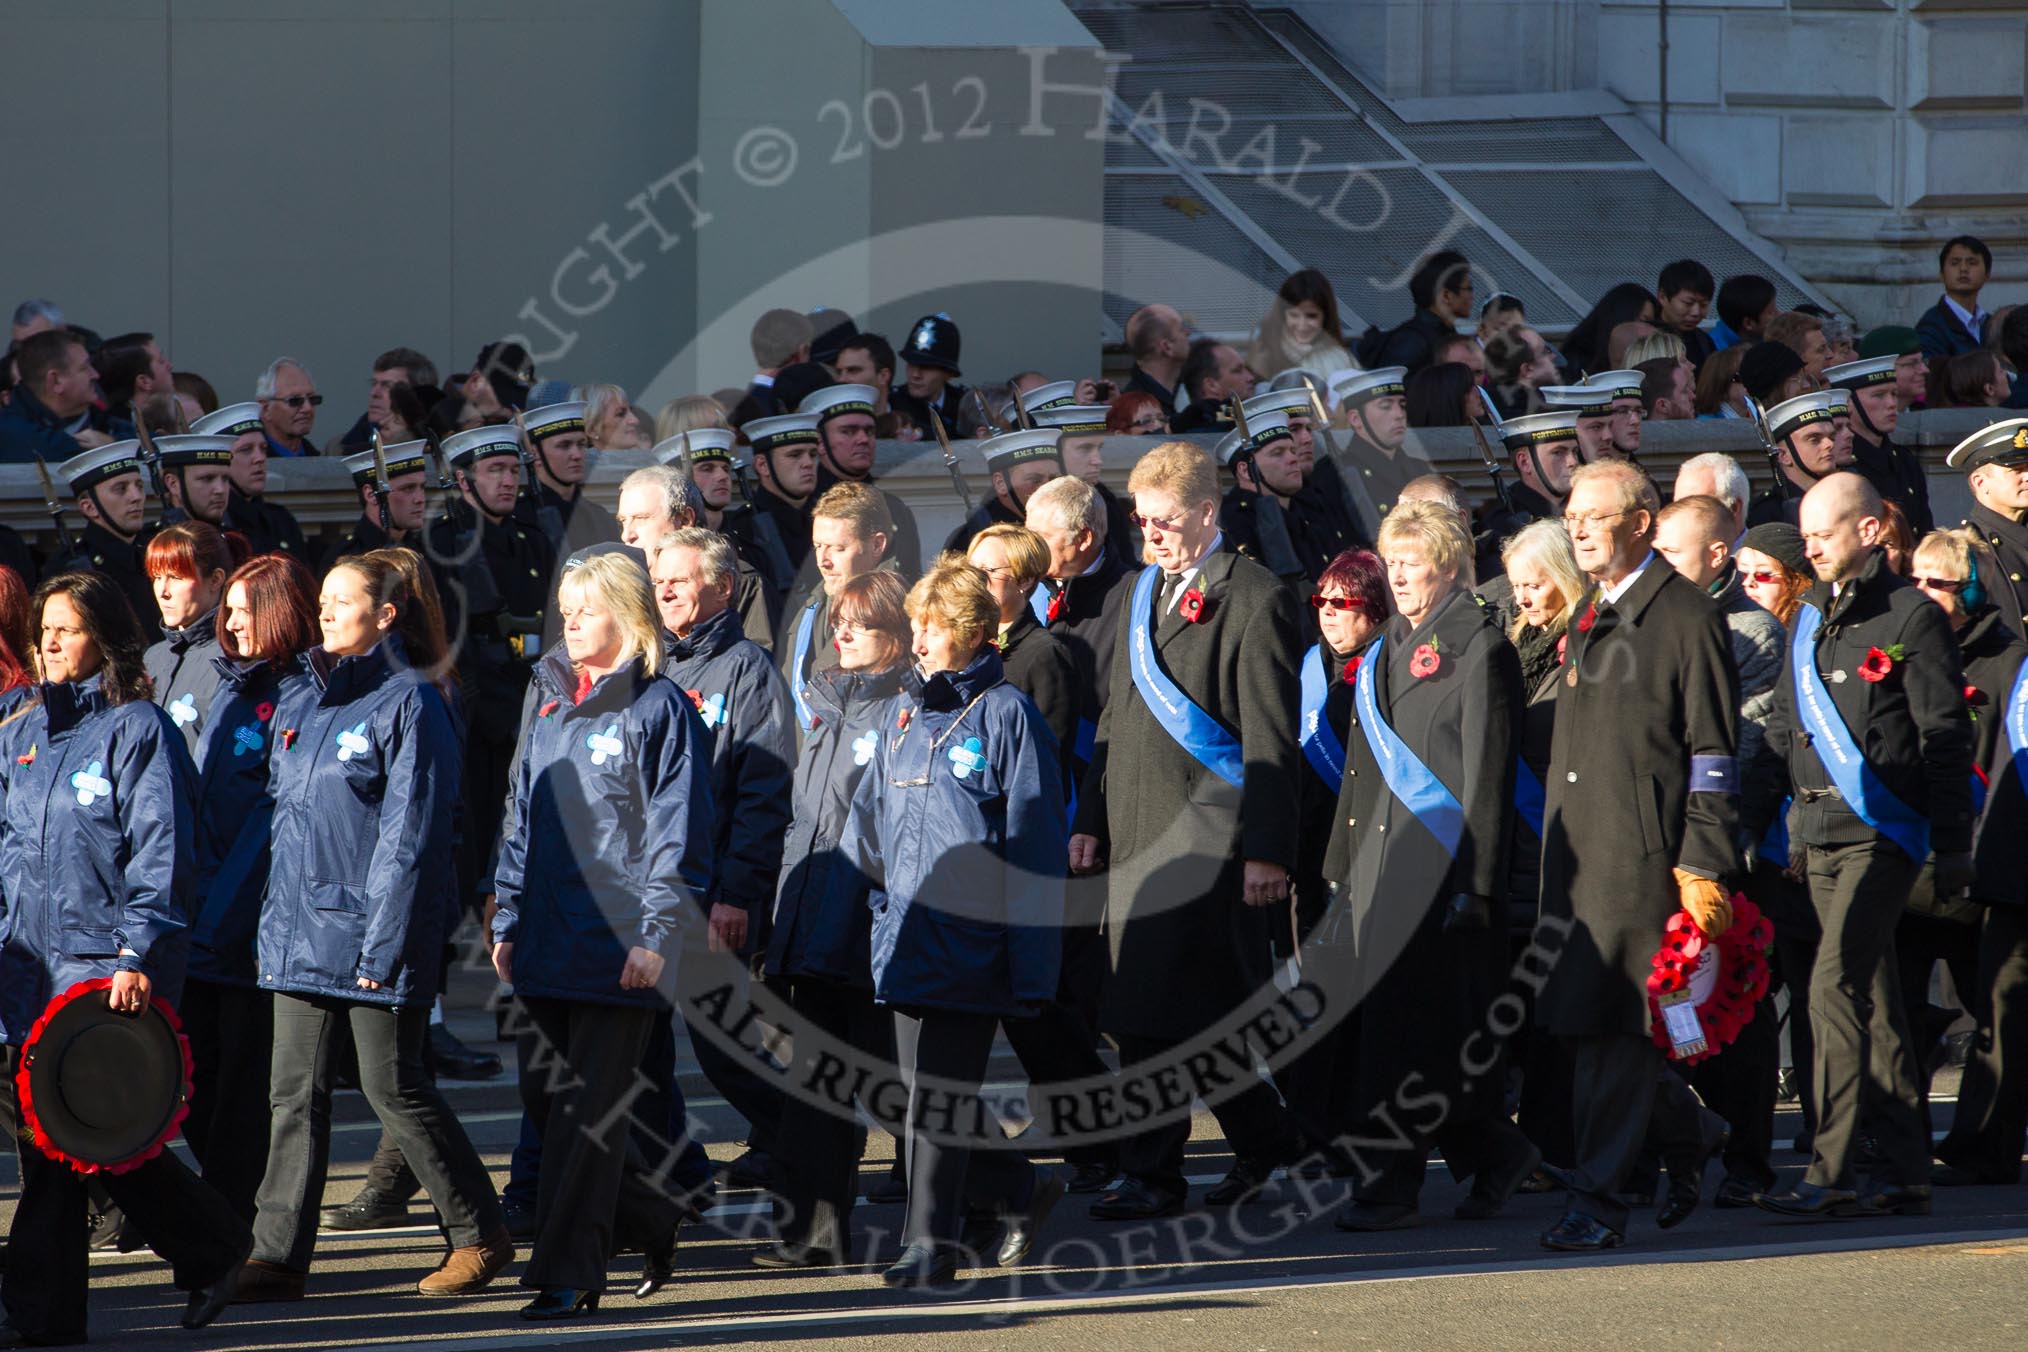 Remembrance Sunday 2012 Cenotaph March Past: Group M26 - The Blue Cross and M27 - PDSA..
Whitehall, Cenotaph,
London SW1,

United Kingdom,
on 11 November 2012 at 12:13, image #1600